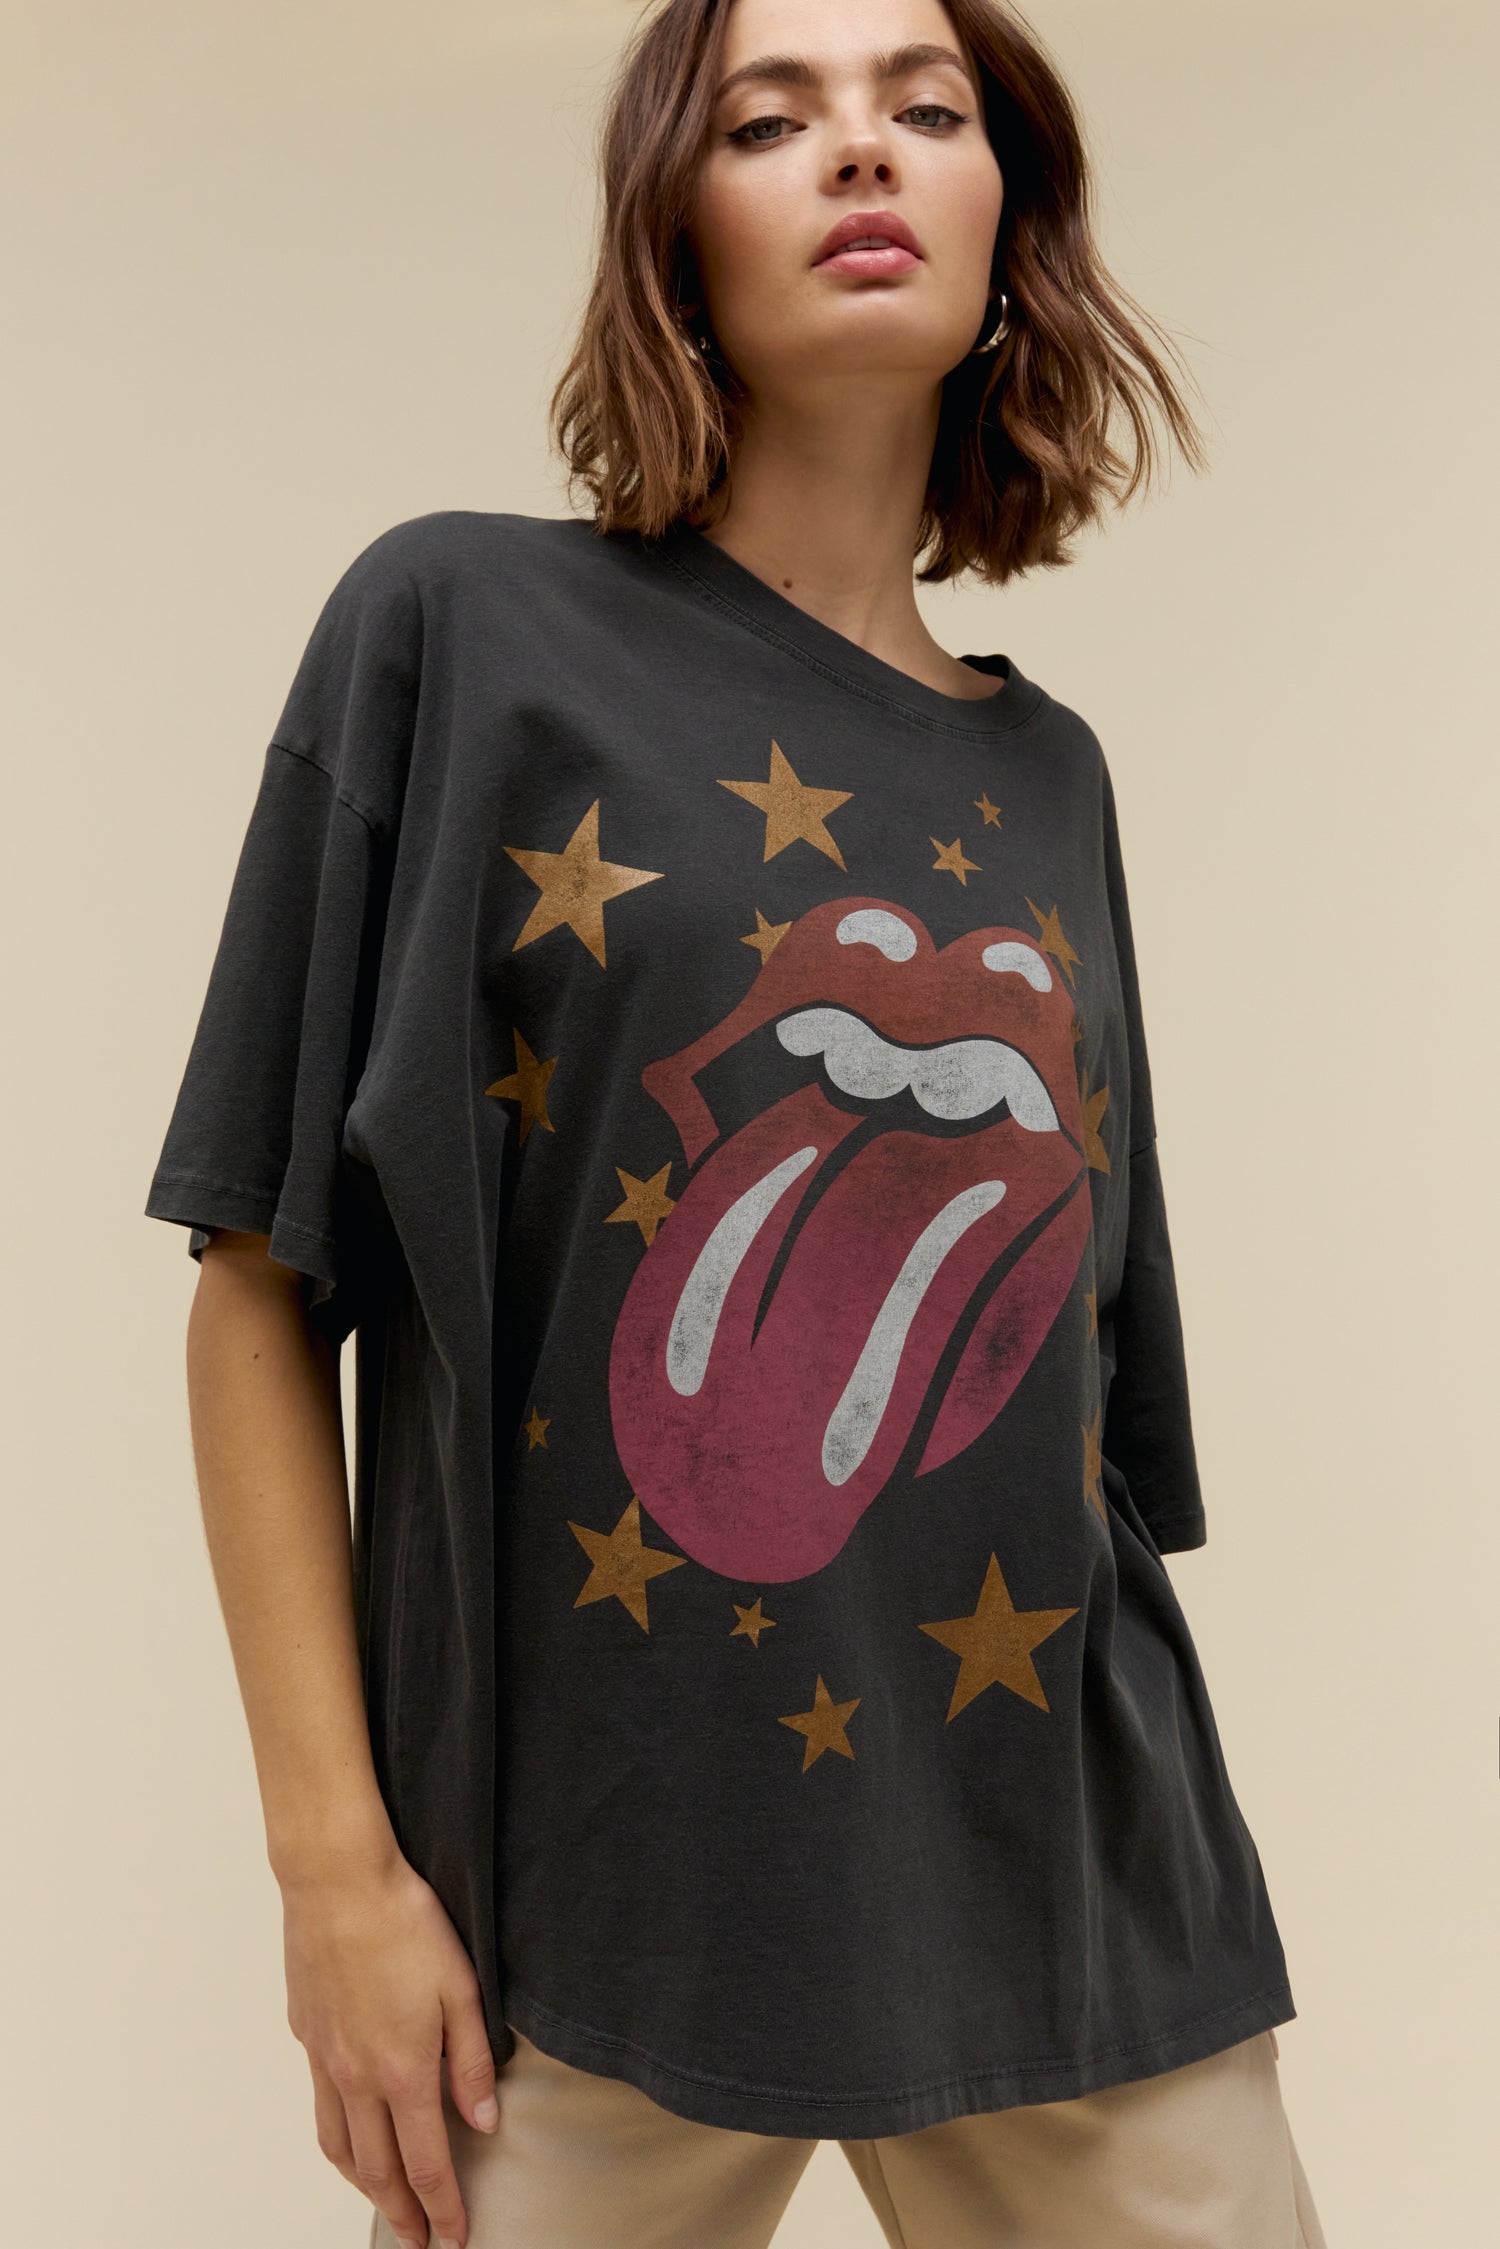 Model wearing an oversized Rolling Stones graphic tee with stars and the classic tongue logo